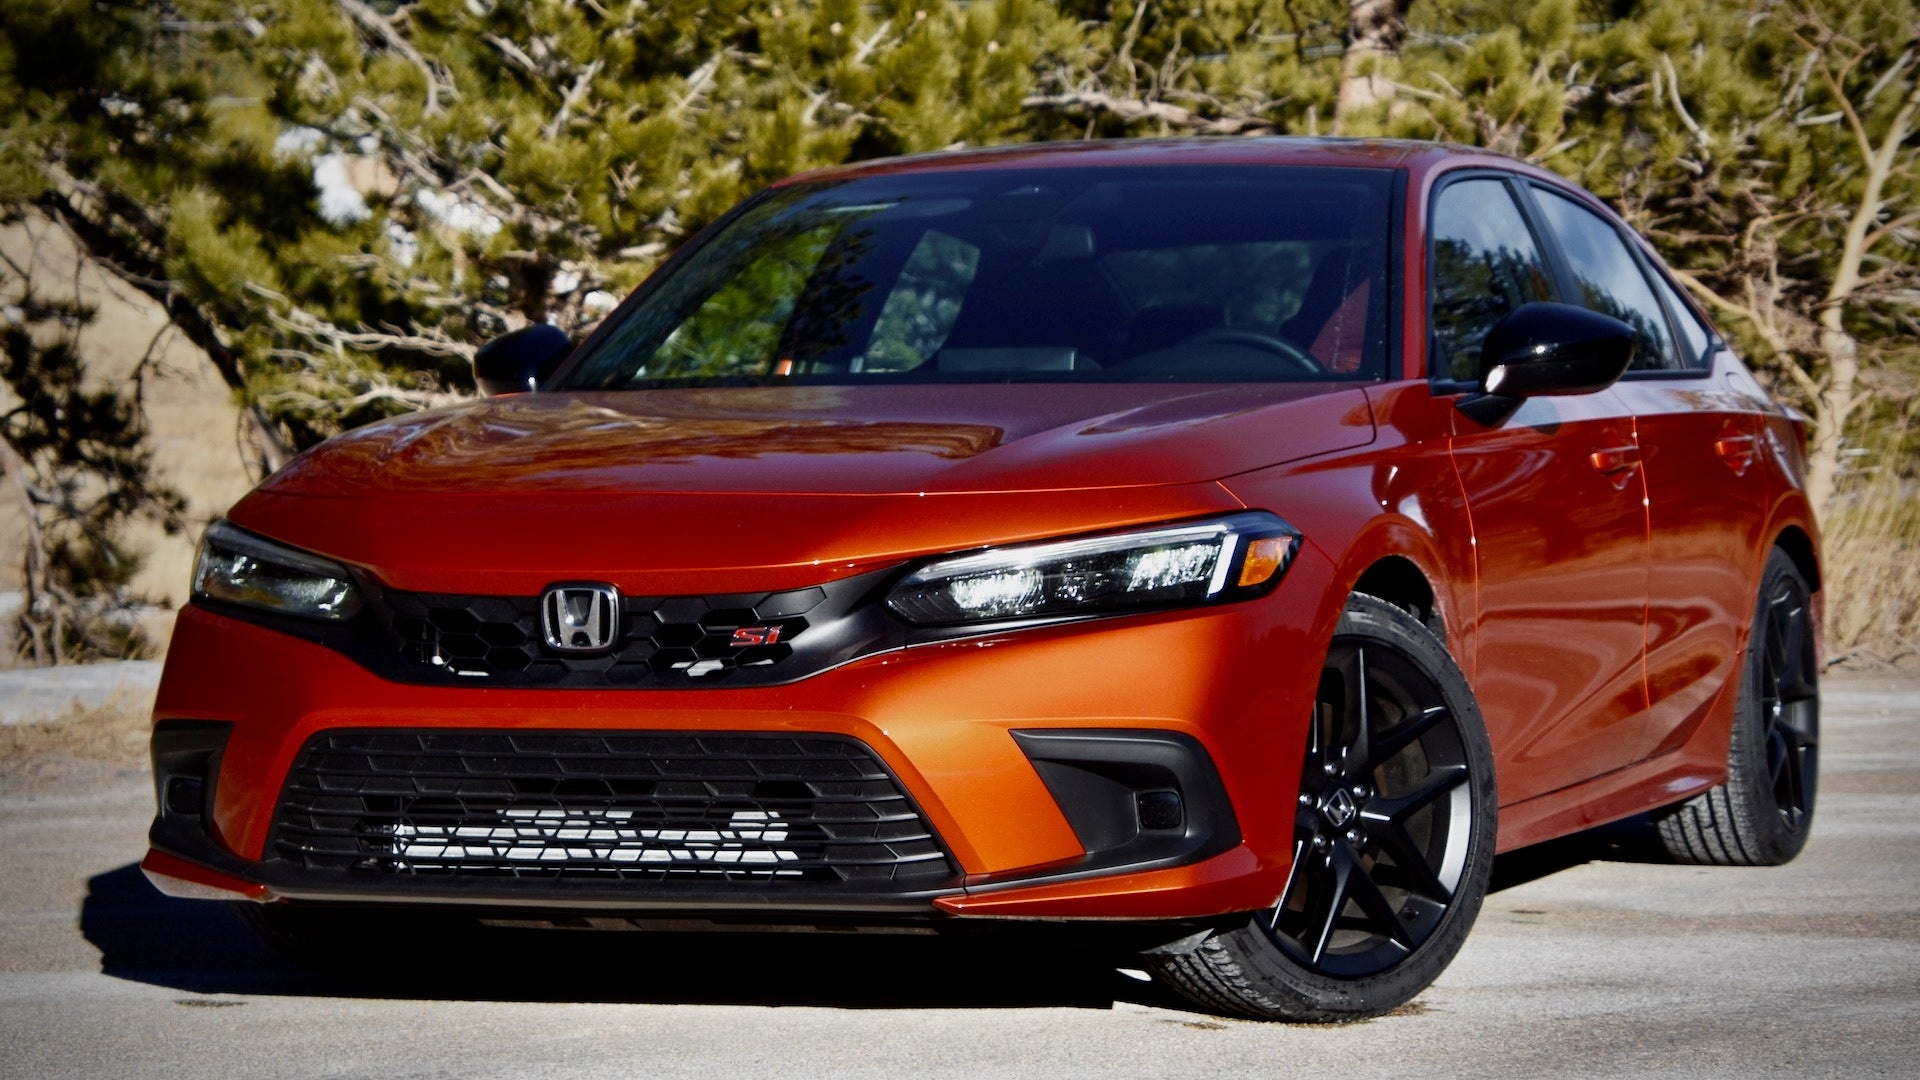 Honda Civic Si, Affordable sports car, Thrilling performance, Driving excitement, 1920x1080 Full HD Desktop